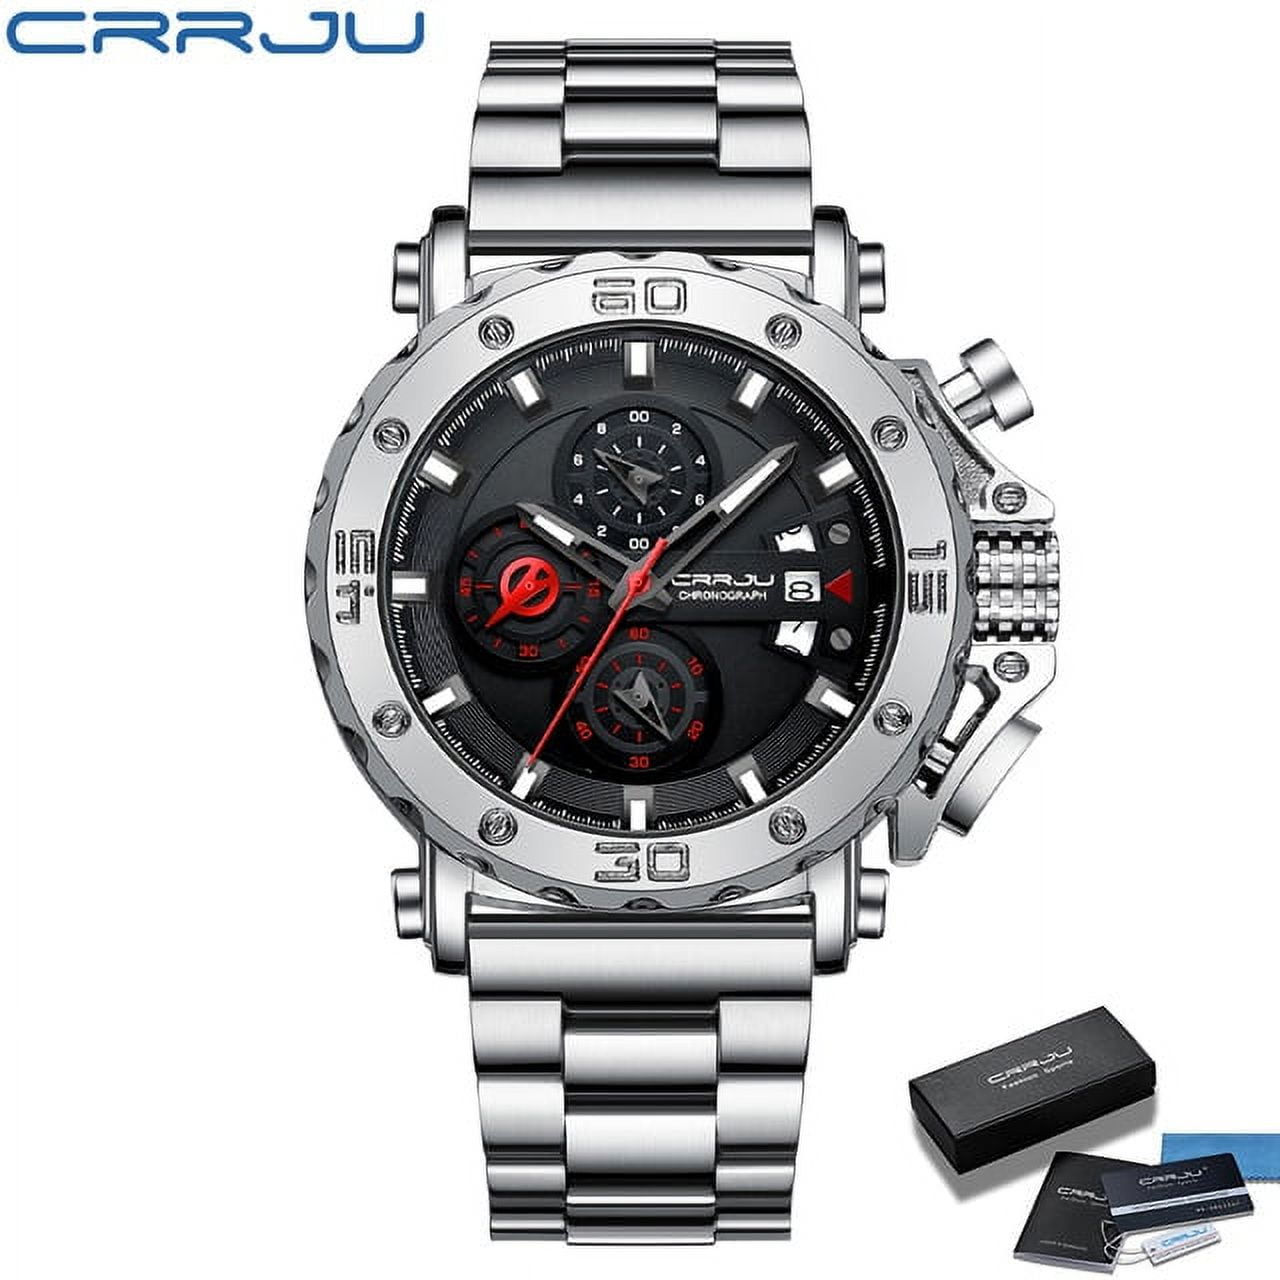 Watches Men Crrju Luxury Army Military Watch High-Quality 316L Stainless Steel Chronograph Clock 2020 Black Rose